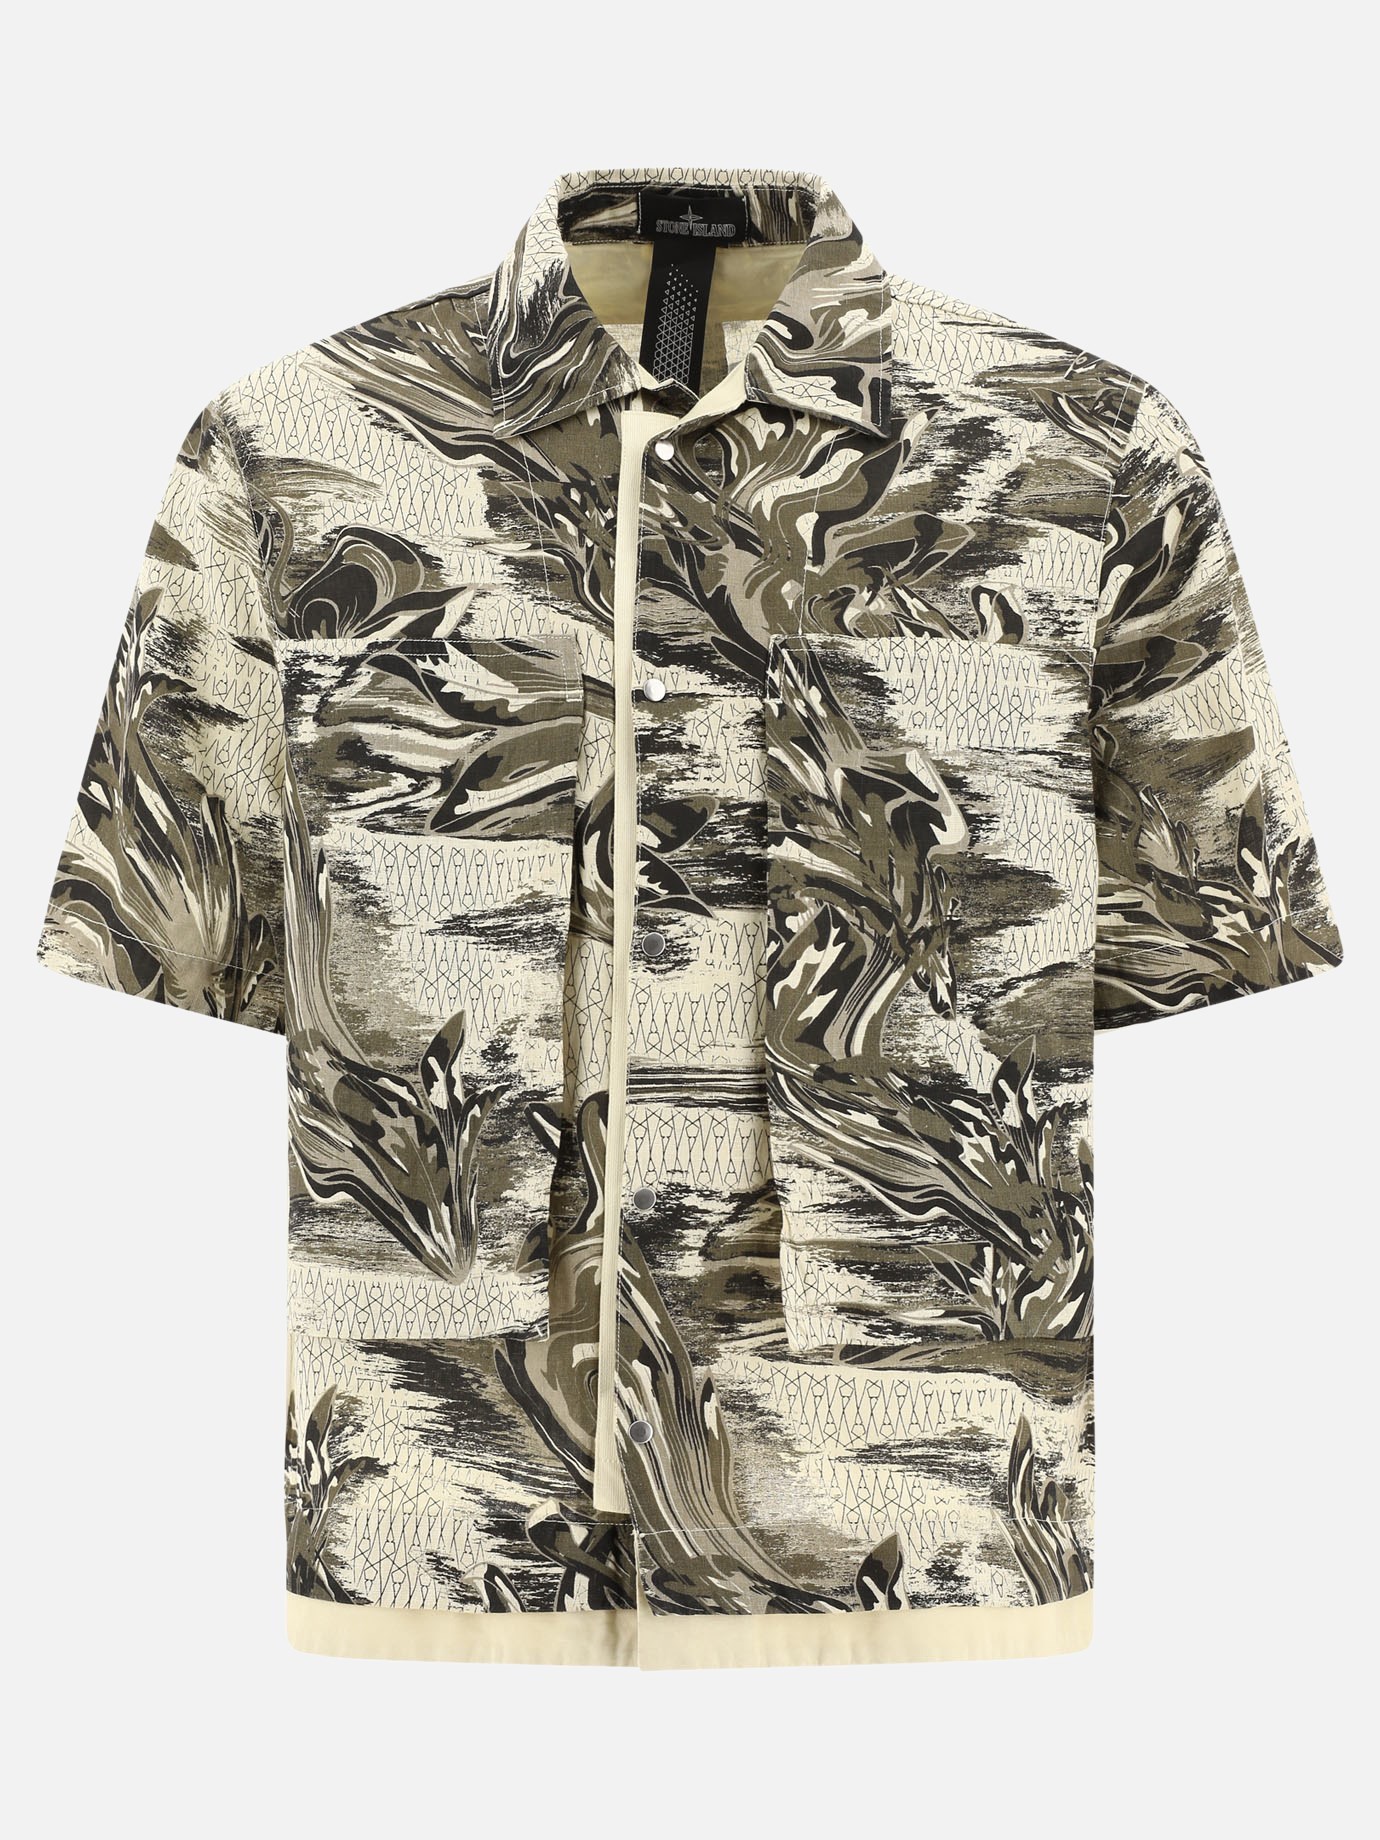 All-over shirtby Stone Island Shadow Project - 2